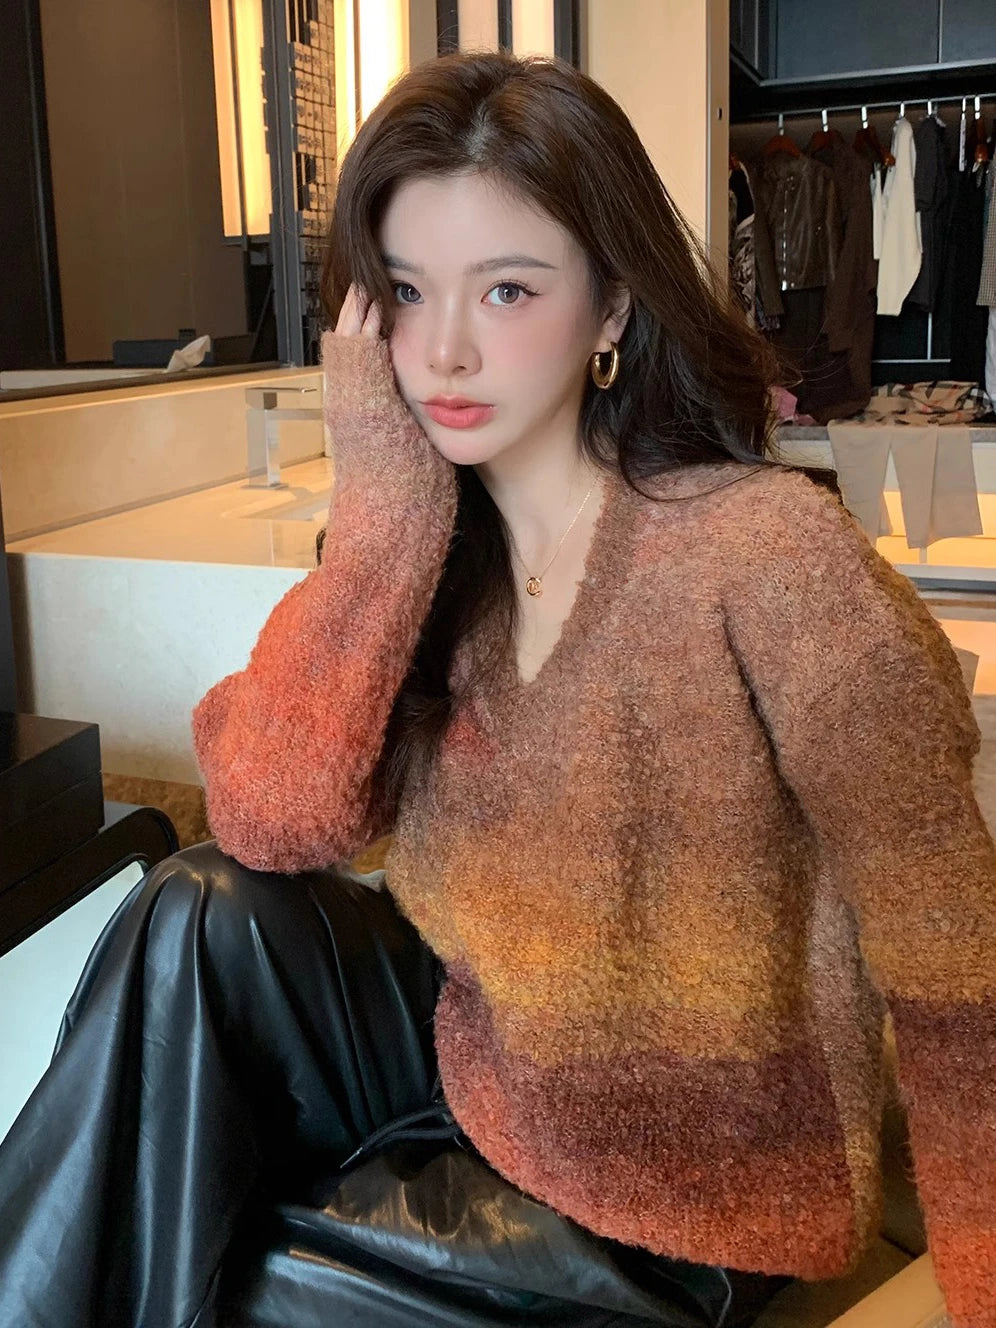 Women Sweater Winter Long Sleeve V Neck Loose Knitwear Colored Fashion Chic Warm Soft Tops C-288